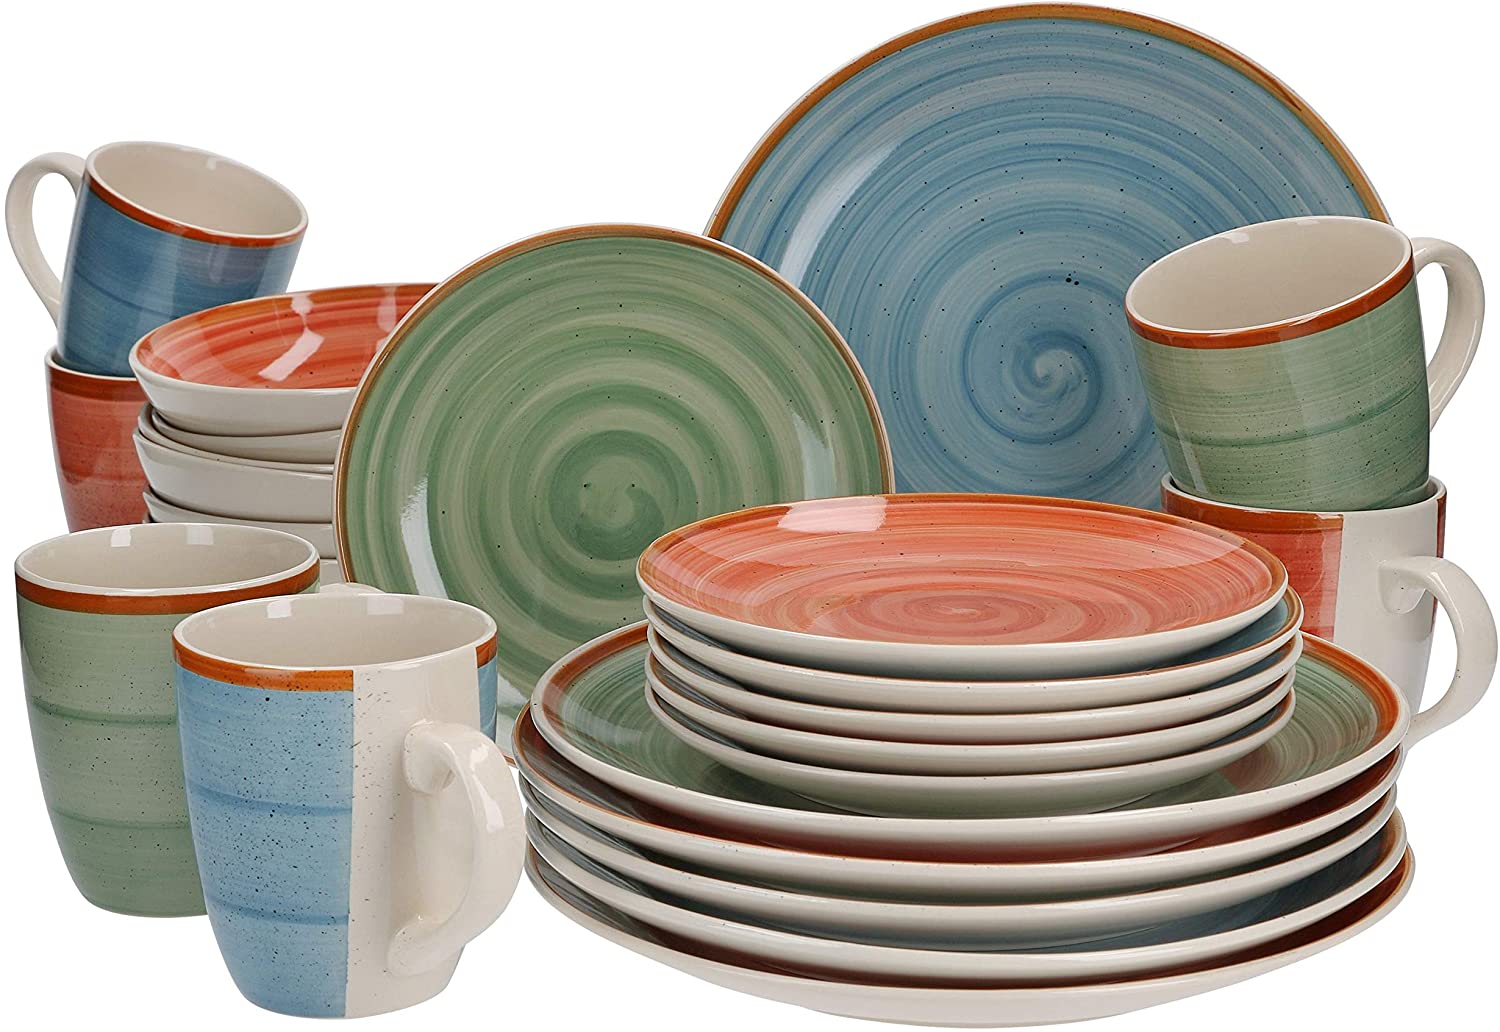 VAN WELL Magnifica Combination Service for 6 People, Crockery Set in Various Colours, Cups Soup Plates, Cake Plates, Dinner Plates, Colourful Crockery Set Made of Elegant Stoneware 24 Pieces, Colourful